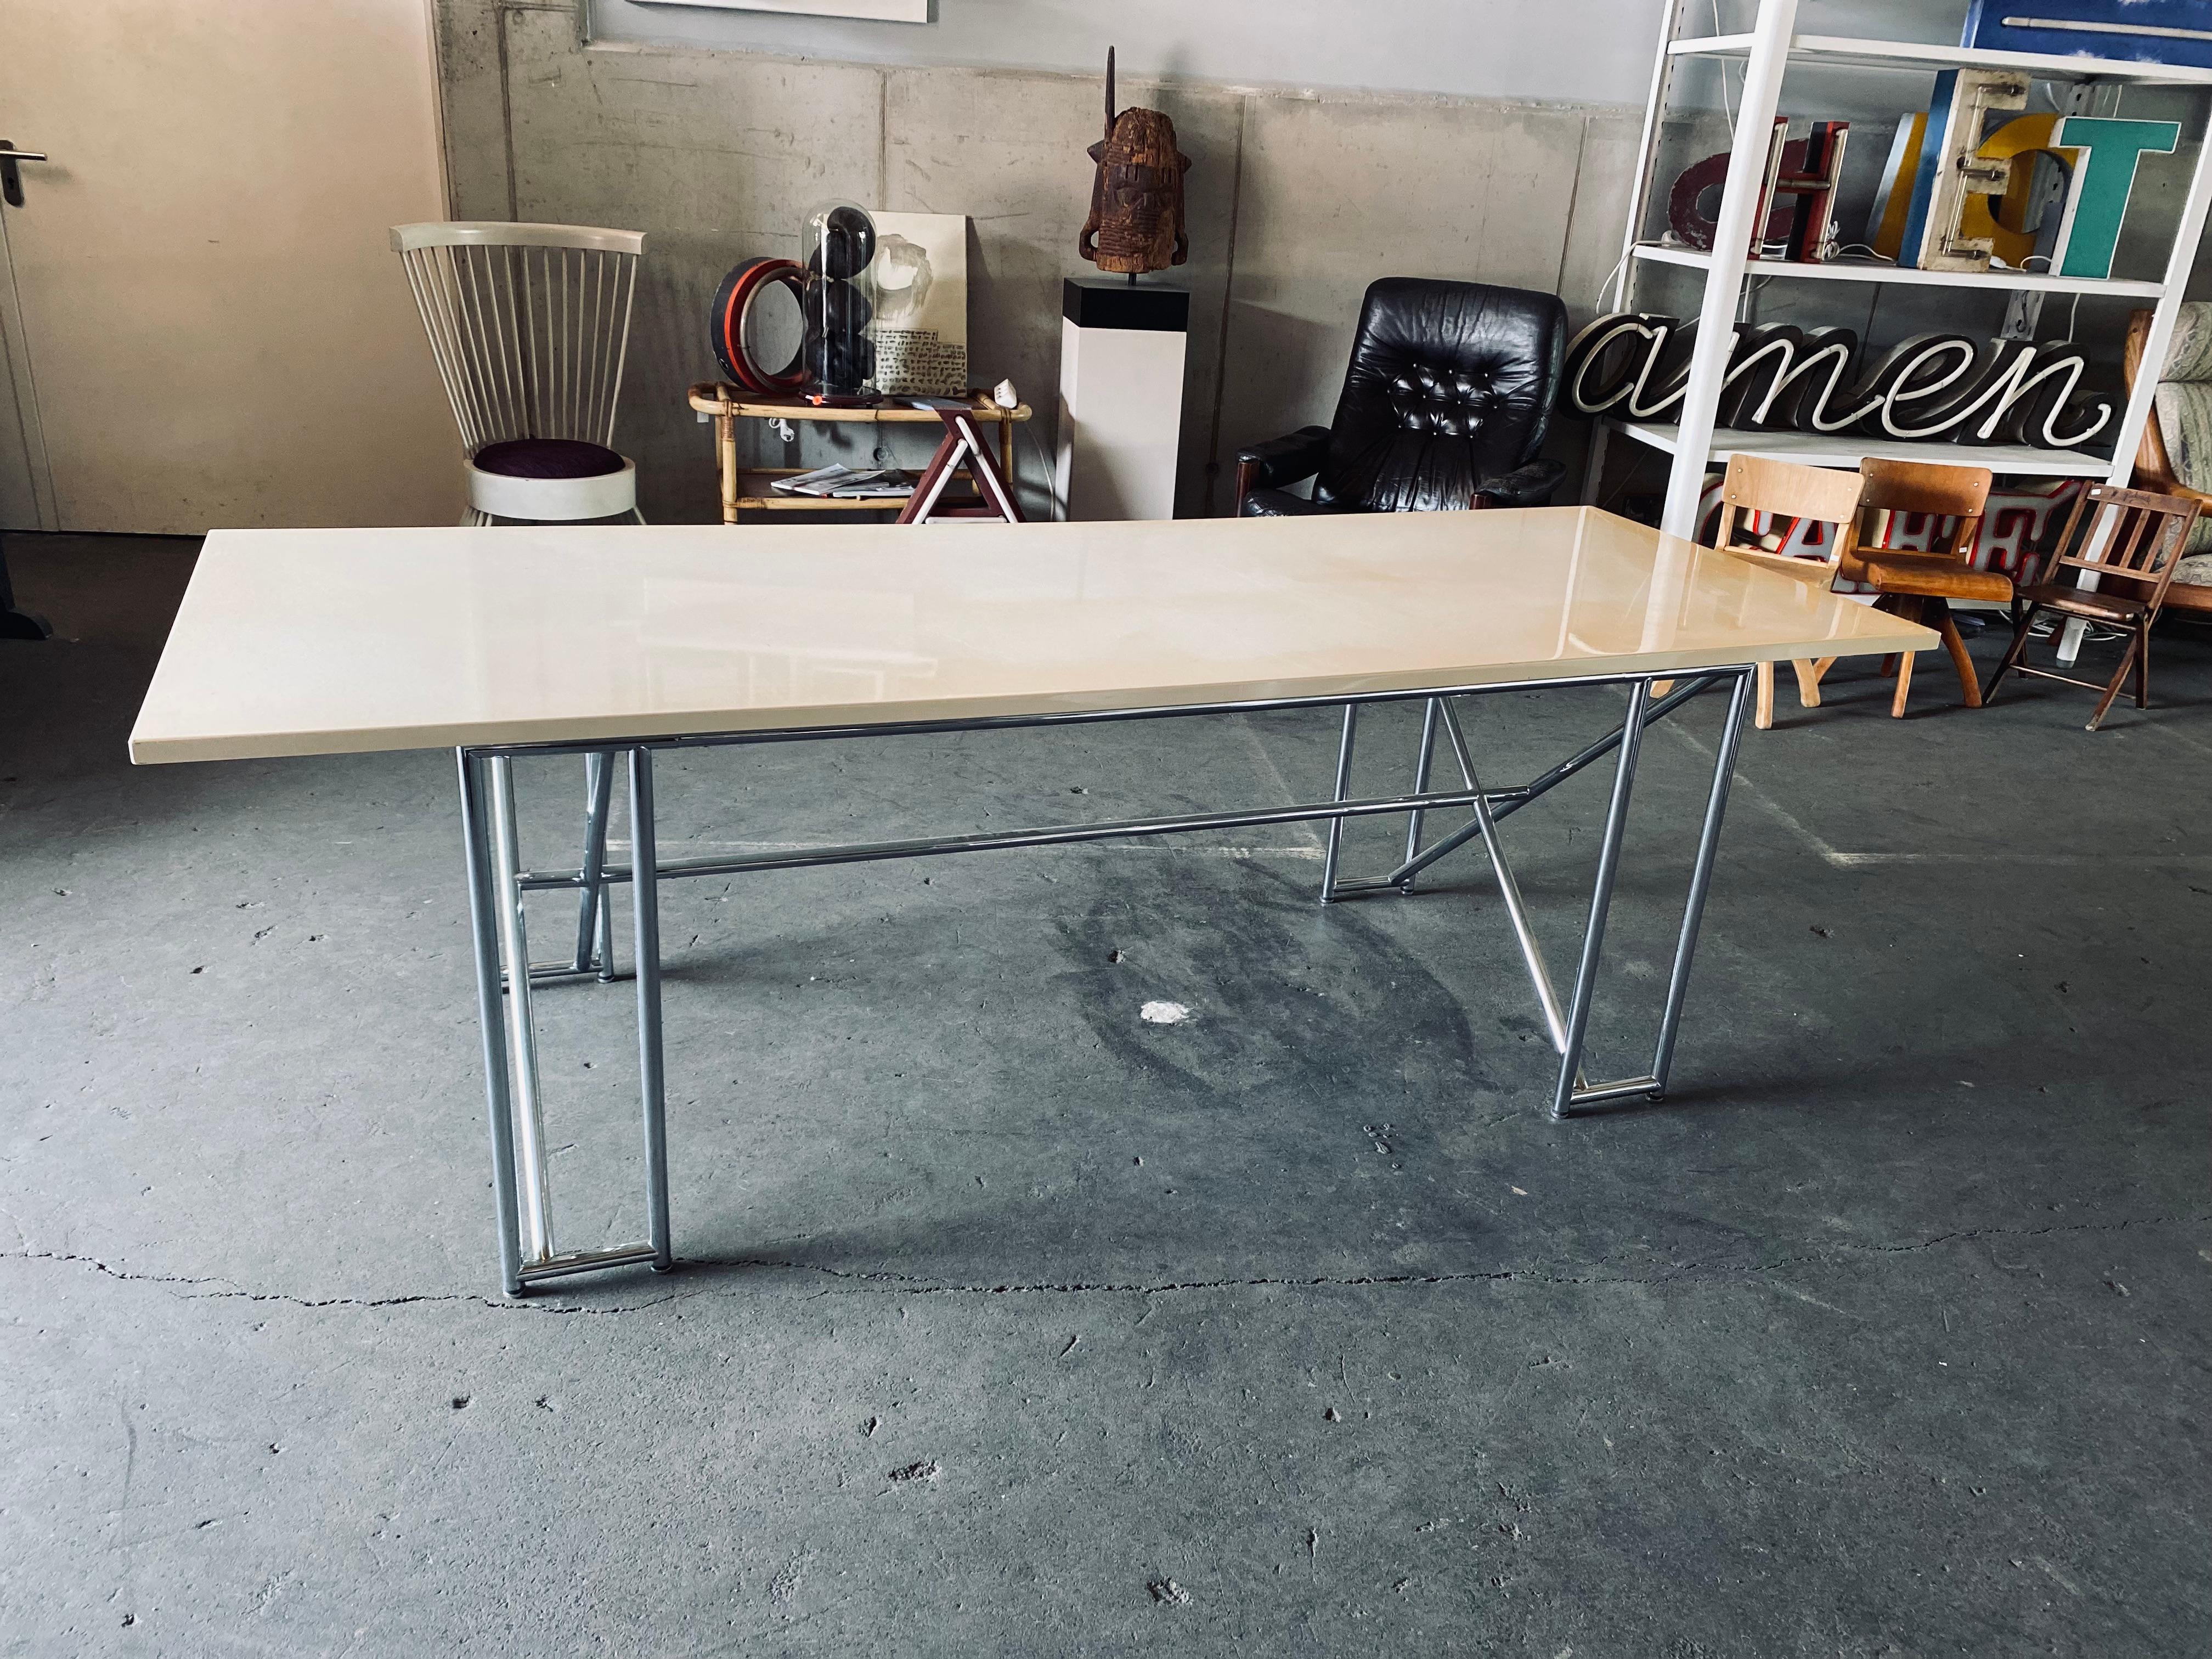 When an avant-garde tubular steel design meets a classic refectory table, the result is the double X. A large but elegant table whose X-shaped supports ensure optimal rigidity. Like so many of Eileen Gray's designs, the double
Frame made of